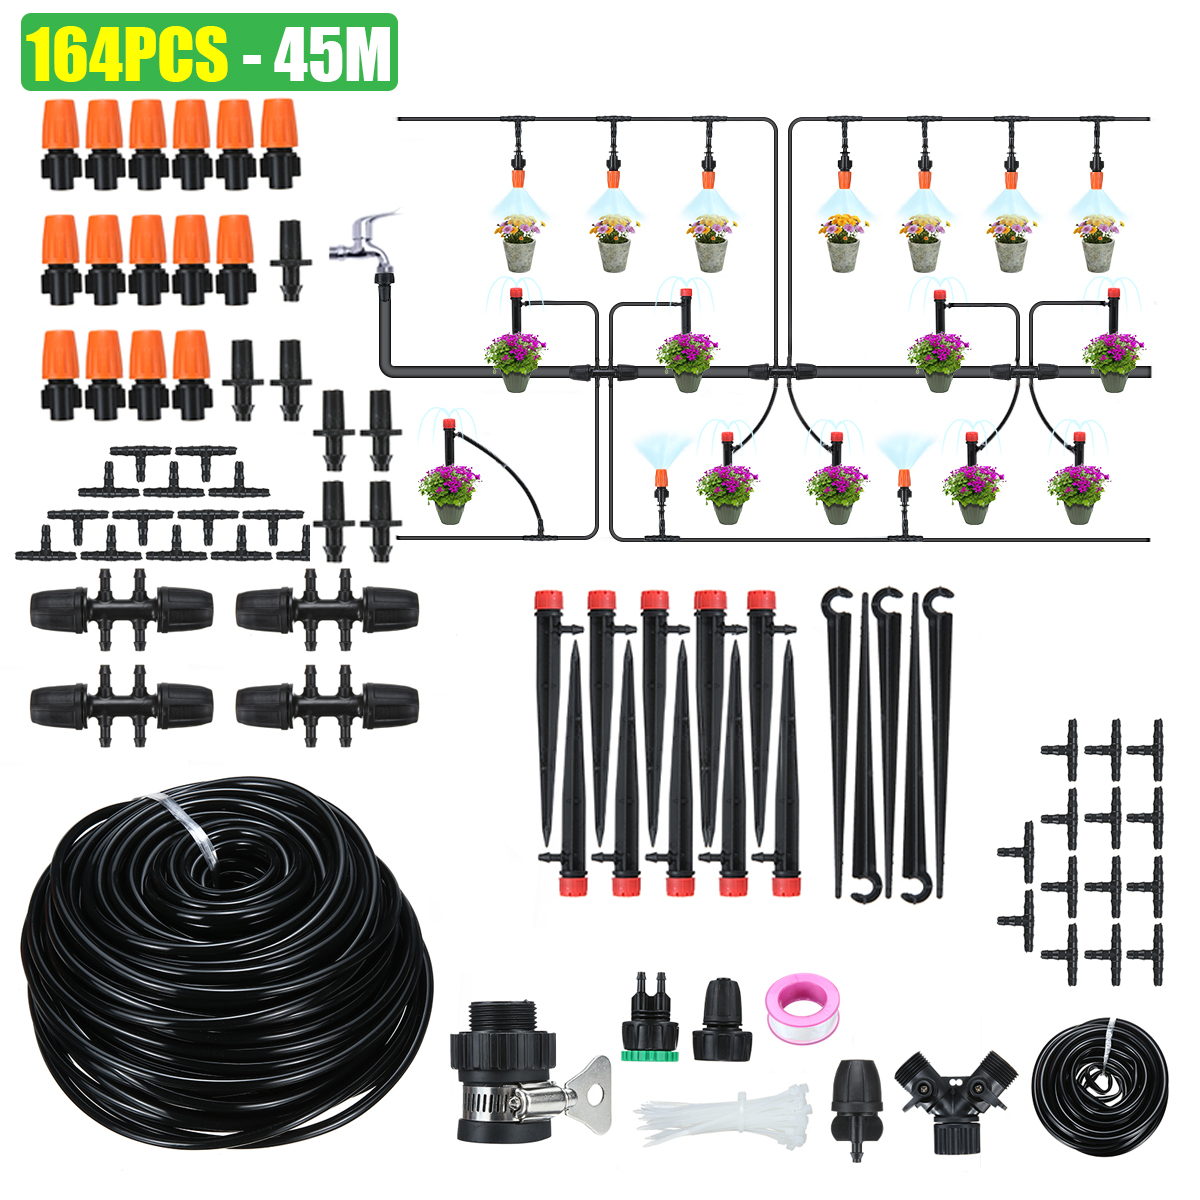 Automatic-Drip-Irrigation-System-Kit-Plant-Self-Watering-Garden-Hose-1809108-9